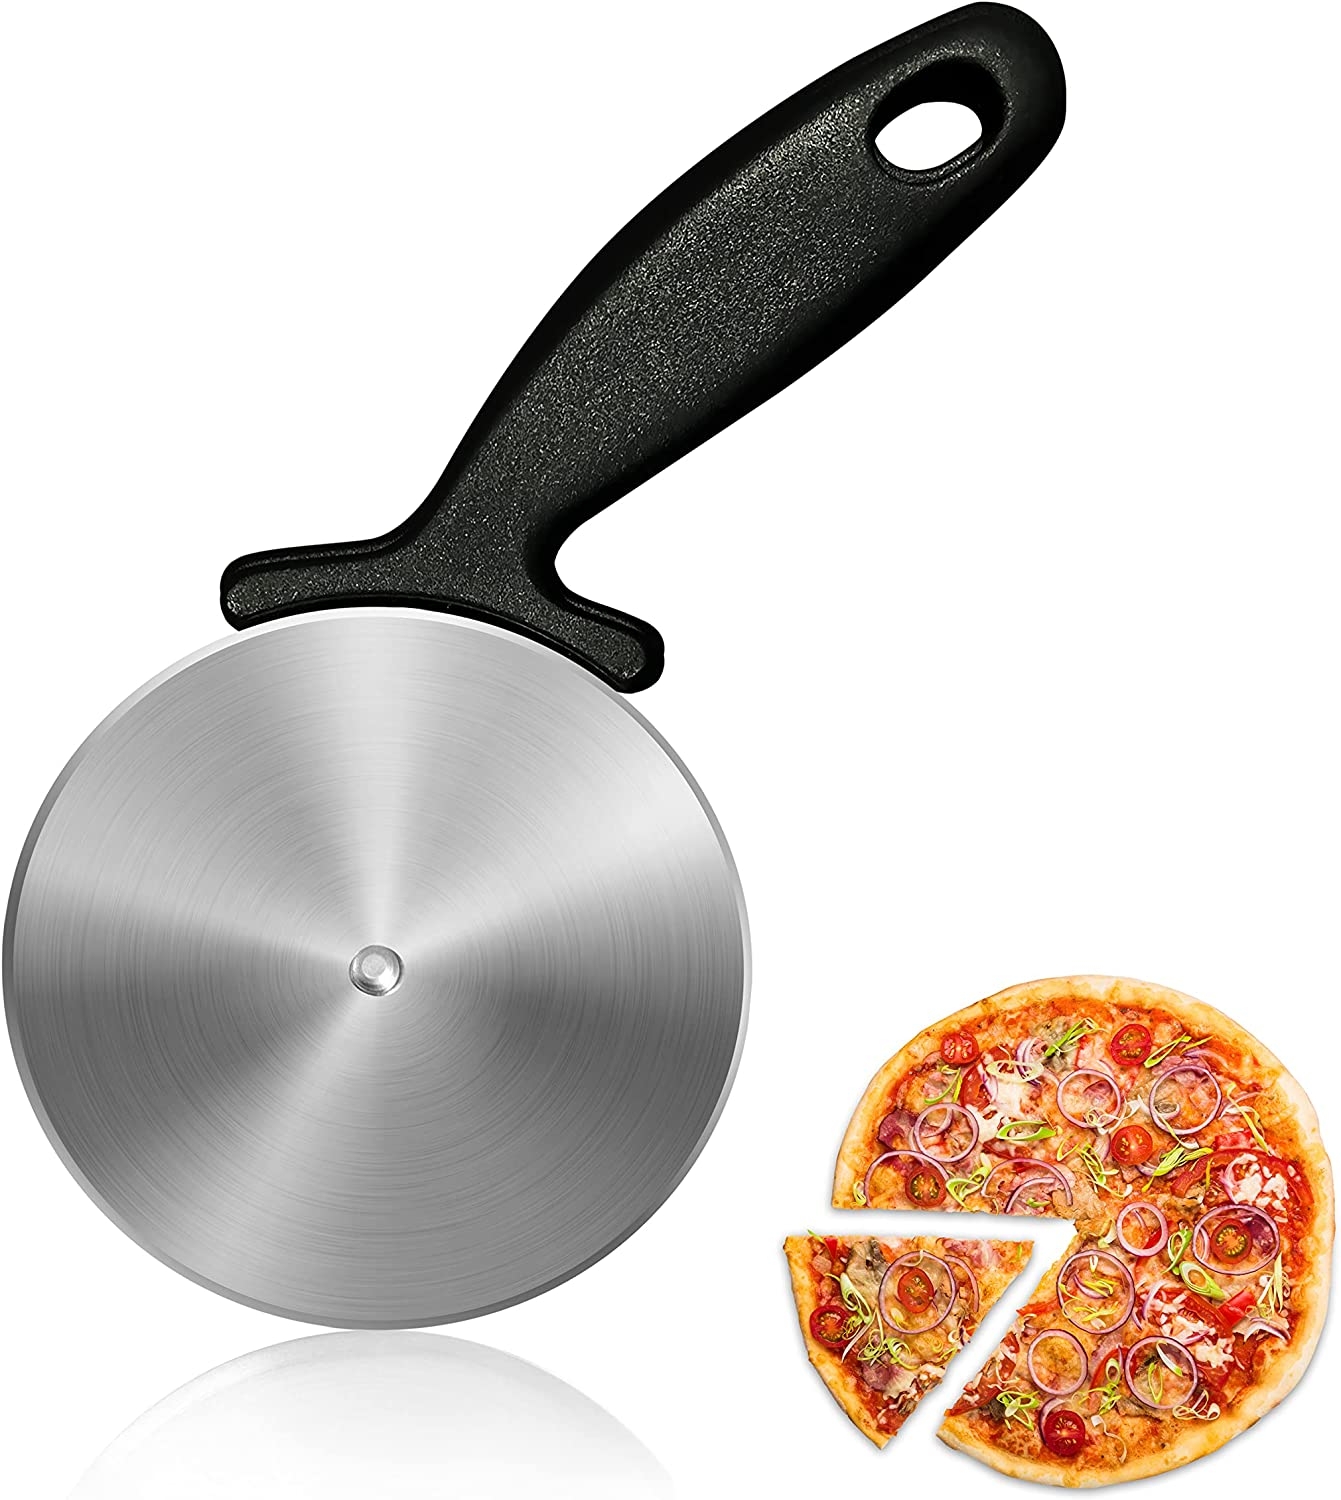 Stainless Steel Pizza Cutter Wheel – Premium & Sharp Durable Slicer with Built-in Finger Guard, Non-Slip Plastic Handle,